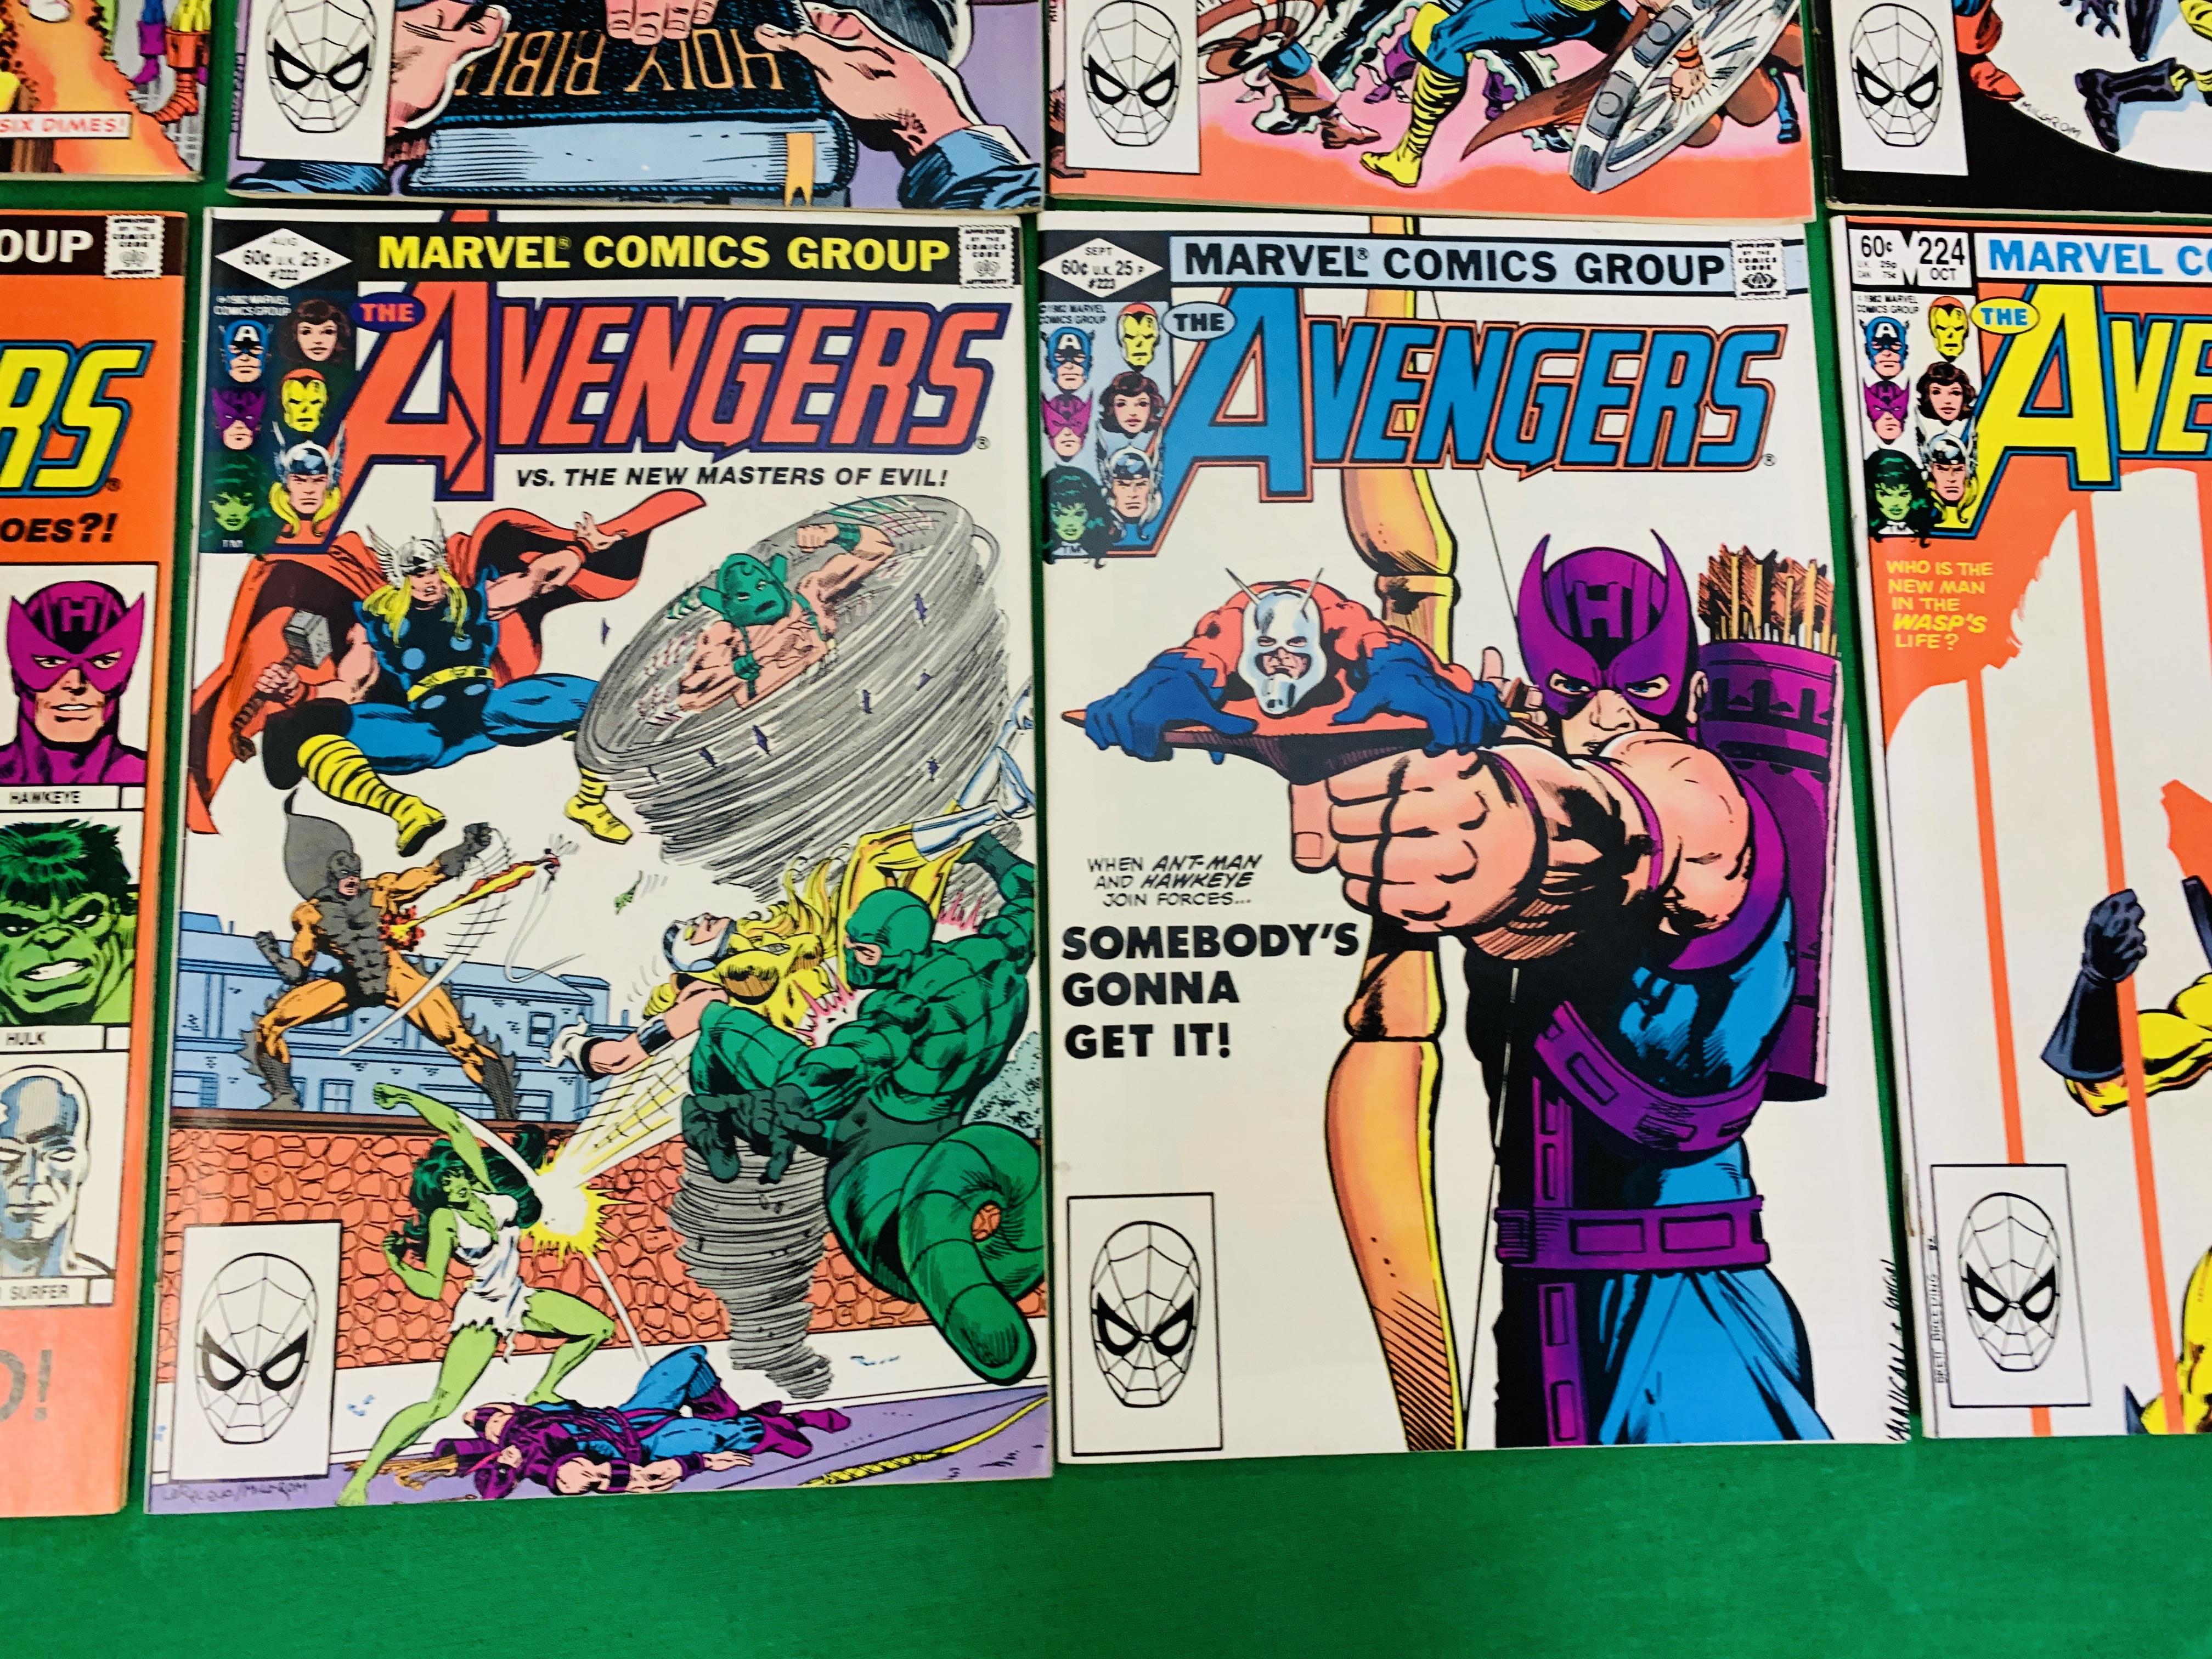 MARVEL COMICS THE AVENGERS NO. 101 - 299, MISSING ISSUES 103 AND 110. - Image 88 of 130